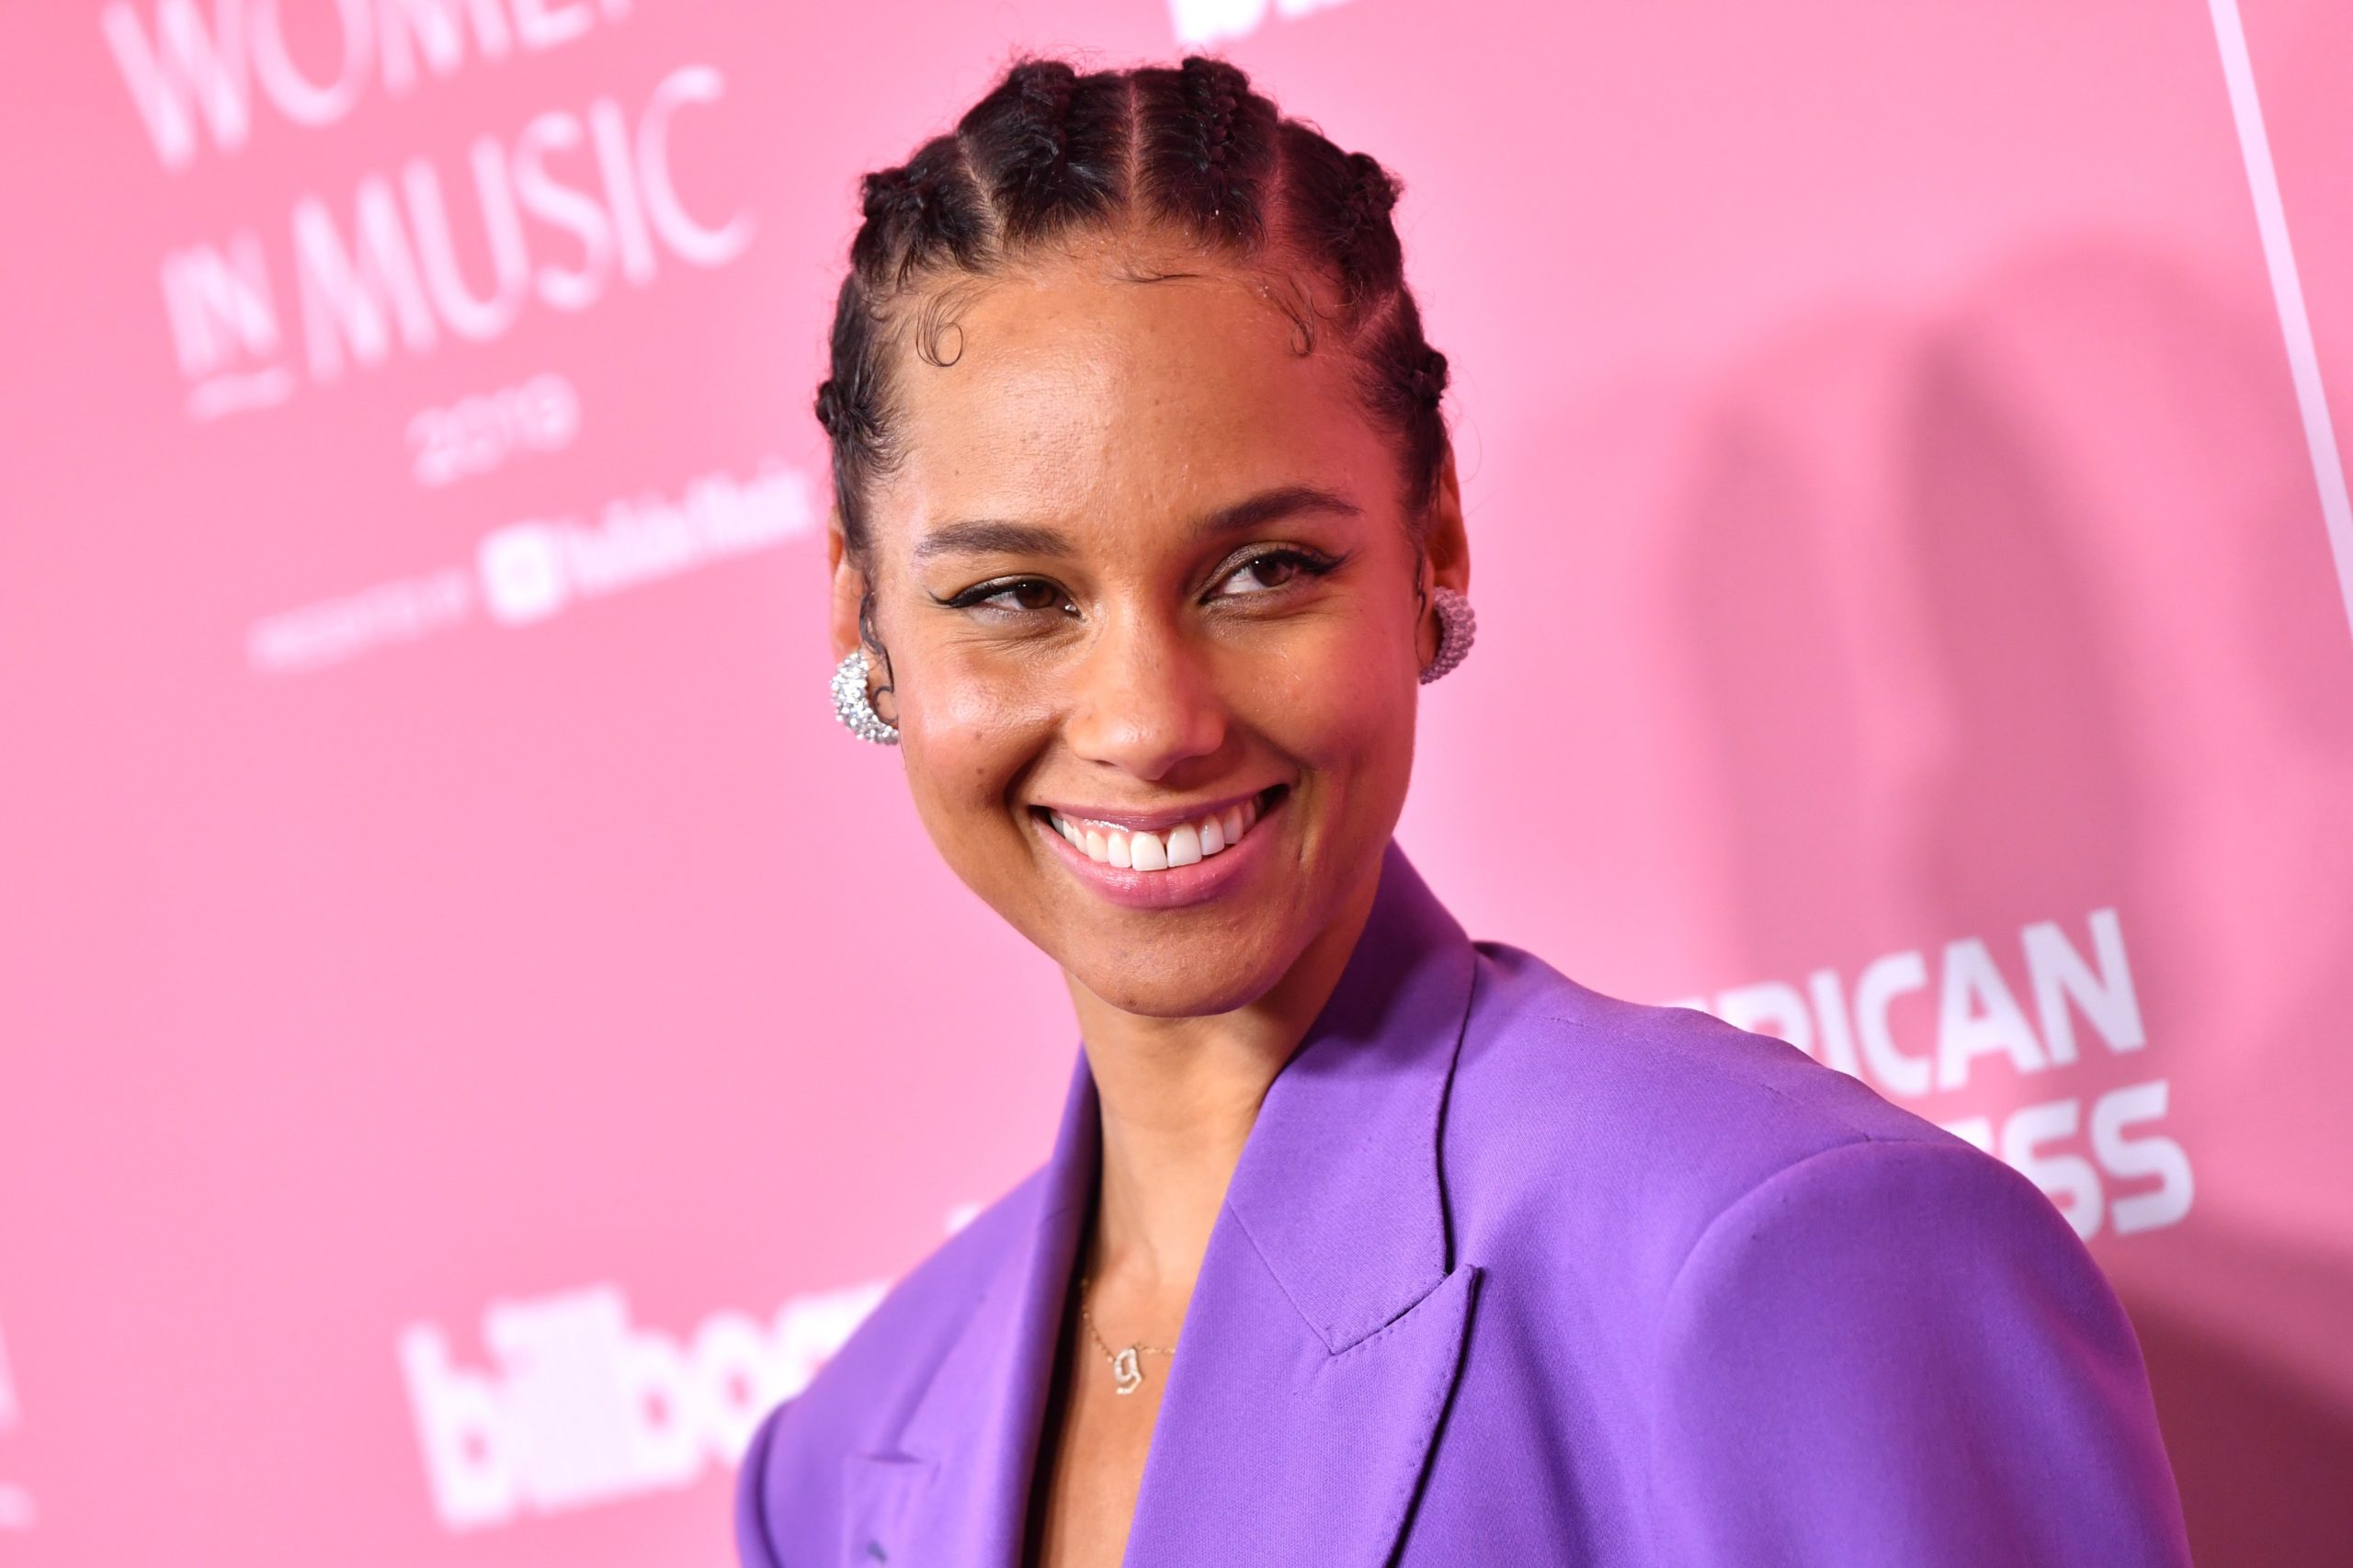 Alicia Keys Is Launching a New Beauty Brand With E.L.F.